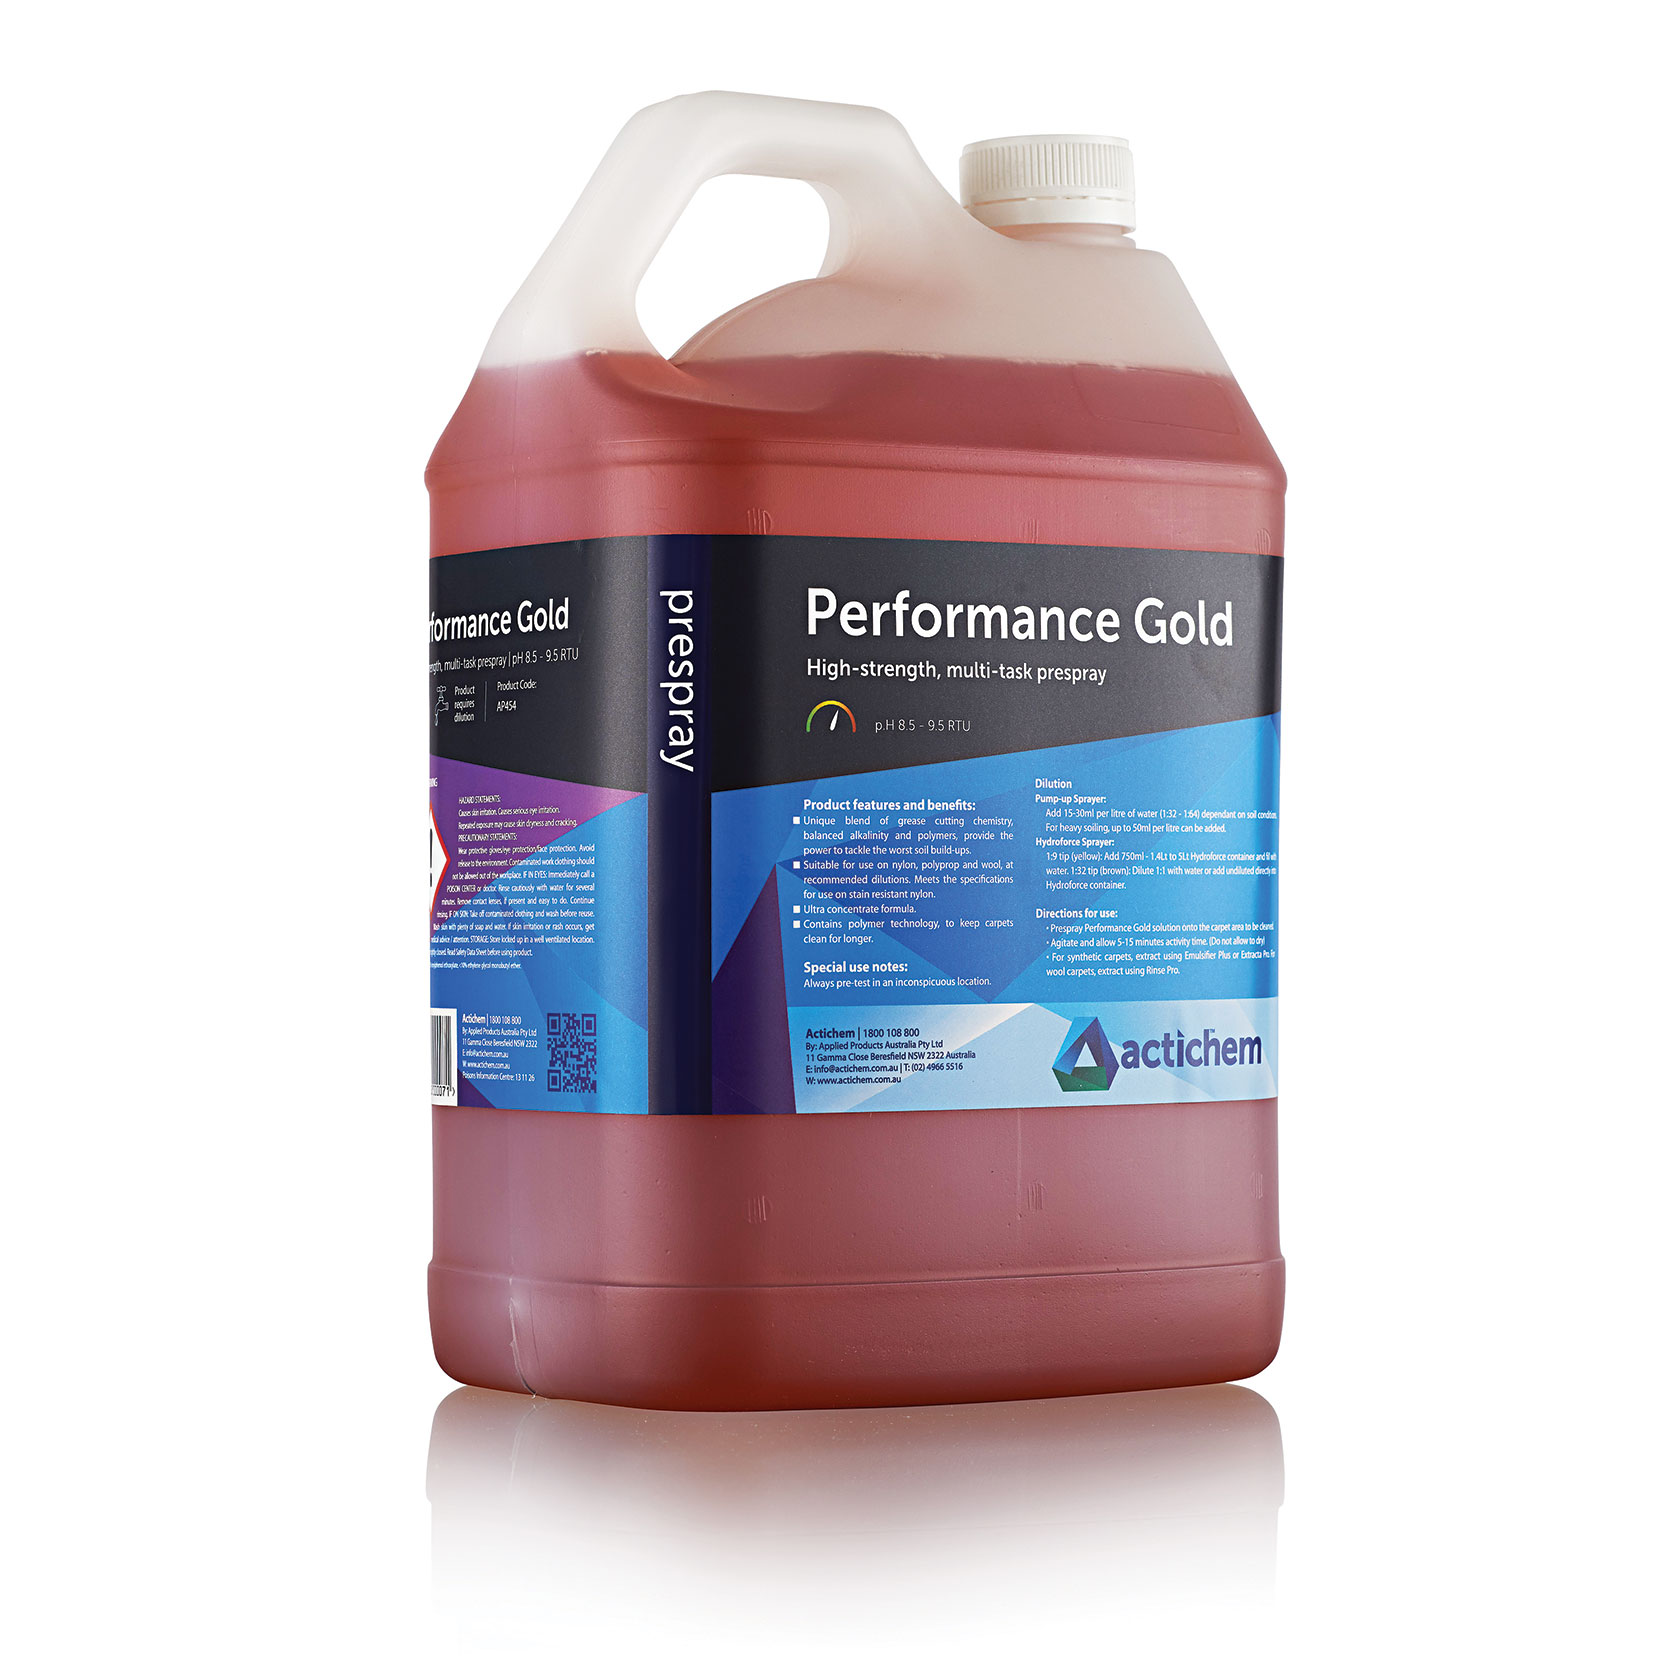 Actichem Performance Gold The best carpet cleaning prespray money can buy